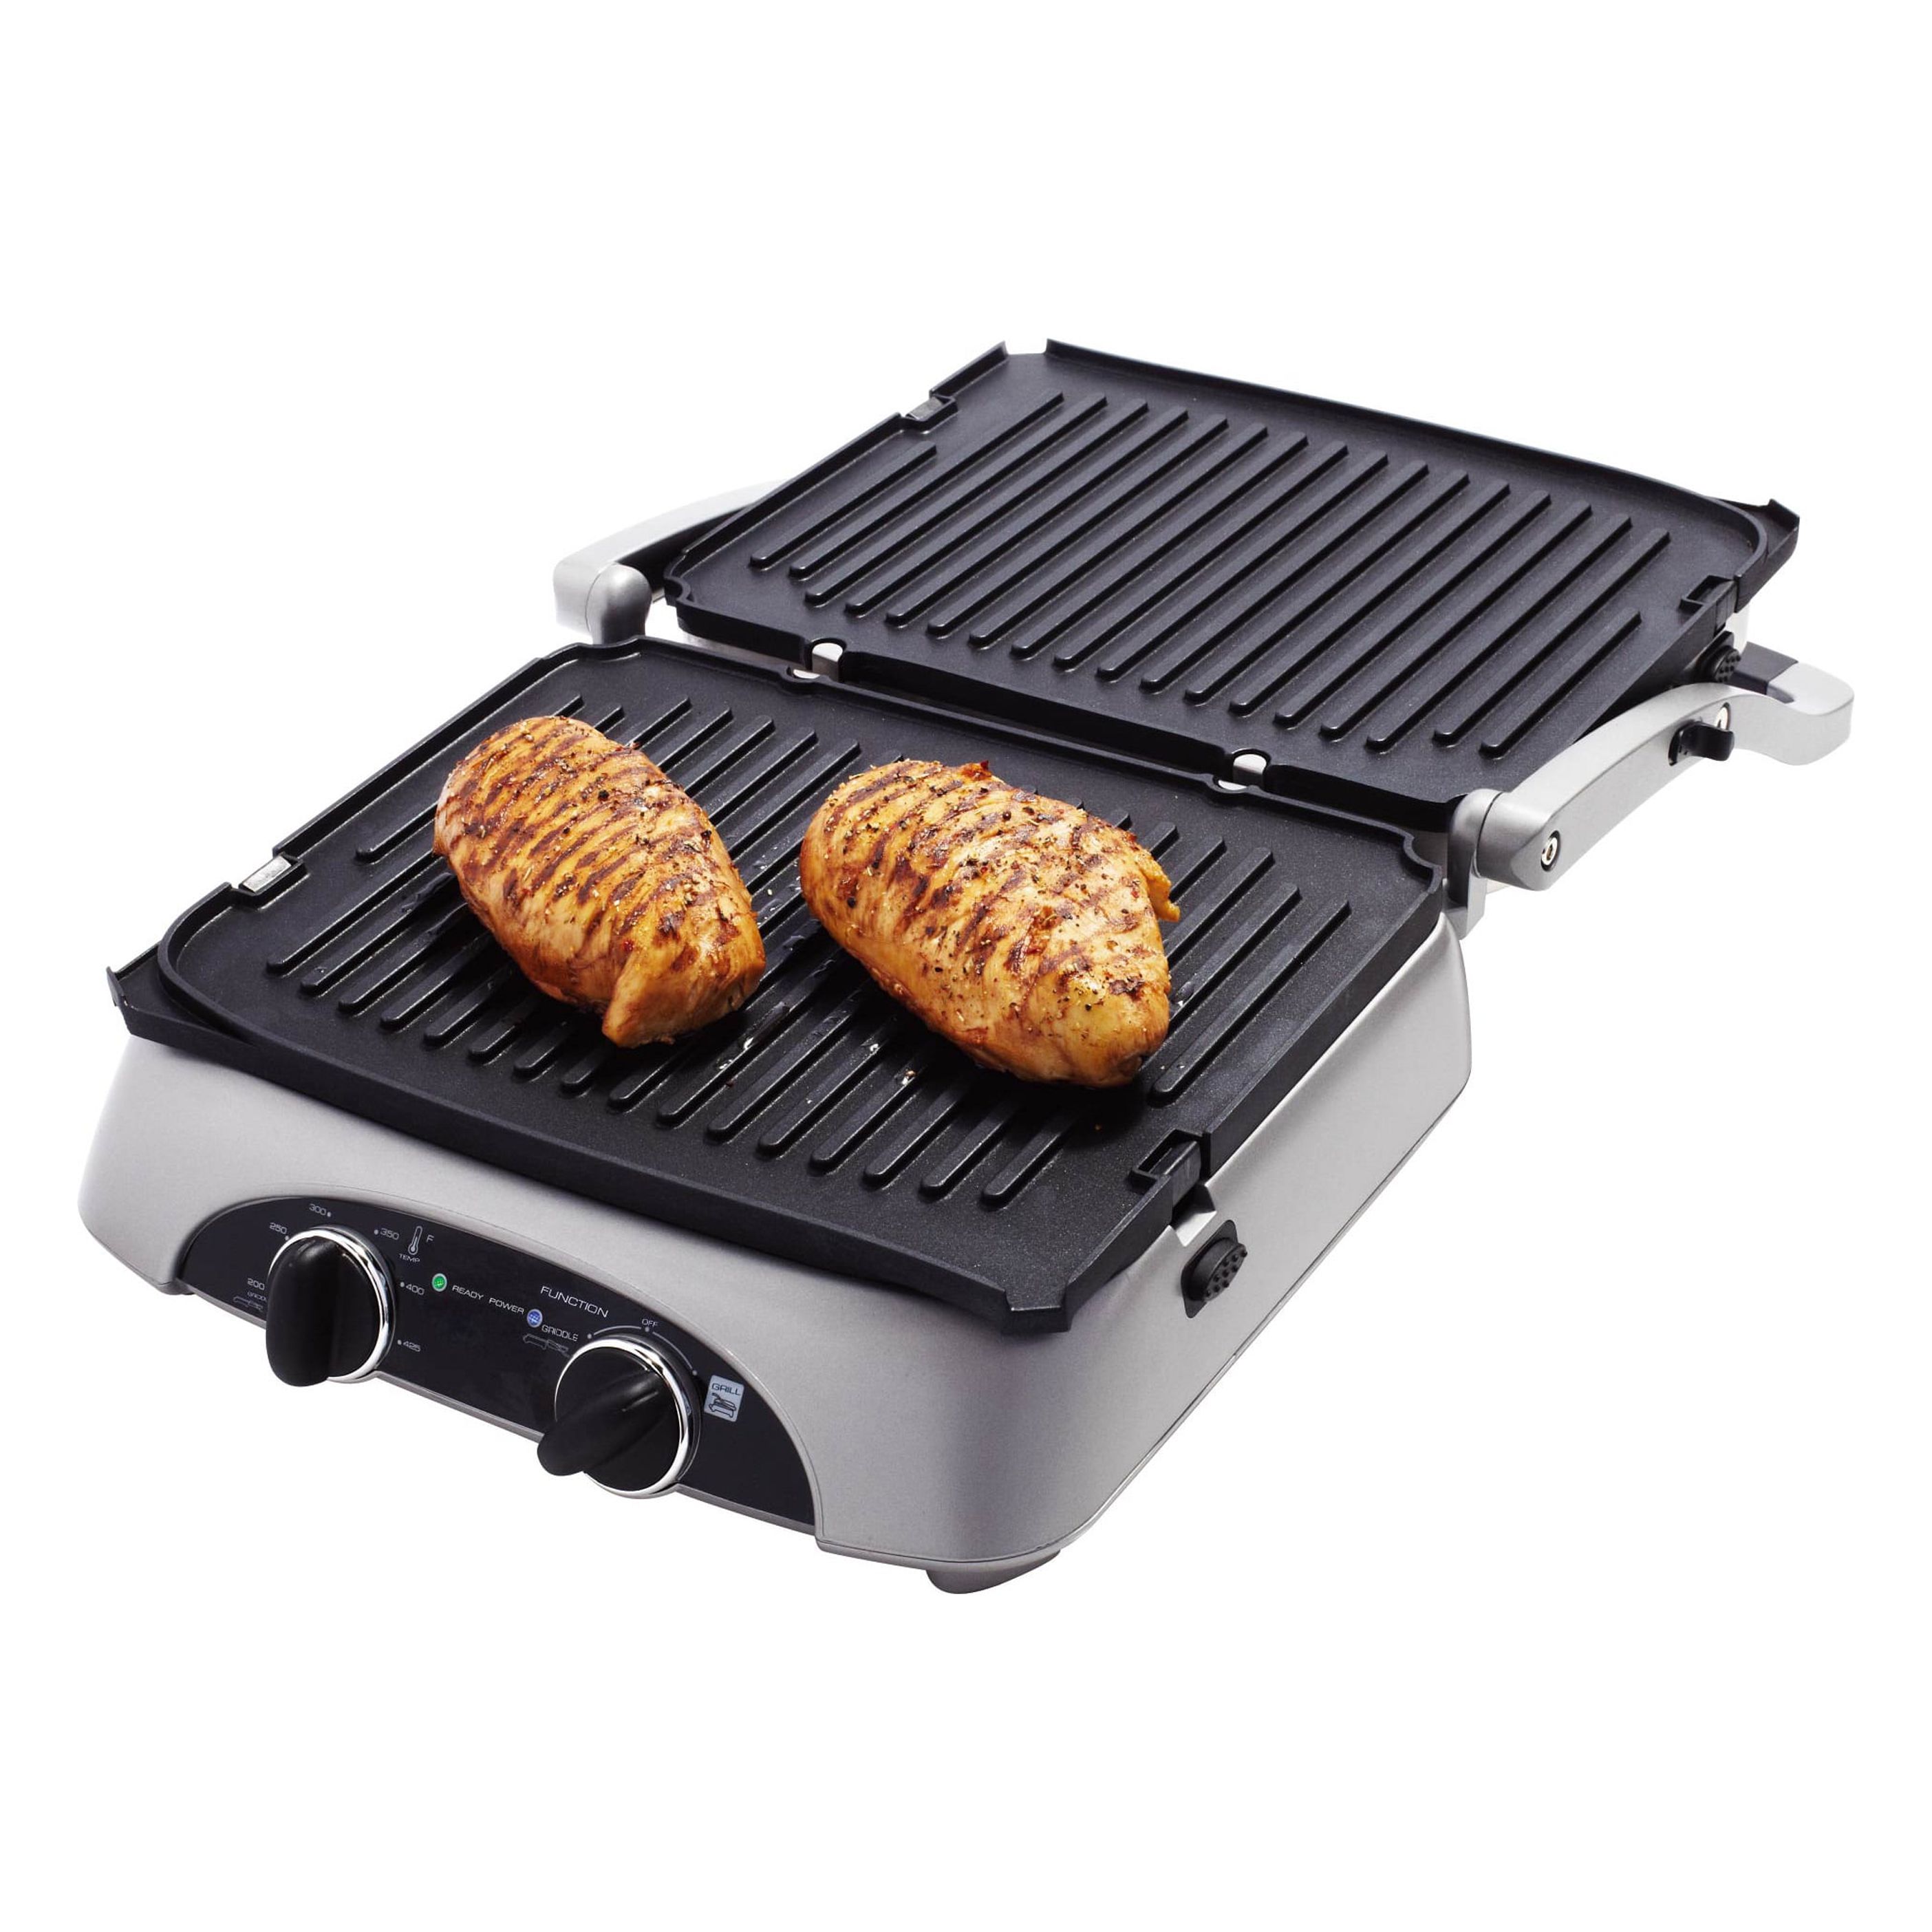 Farberware Royalty 4-In-1 Silver Grill - image 5 of 8